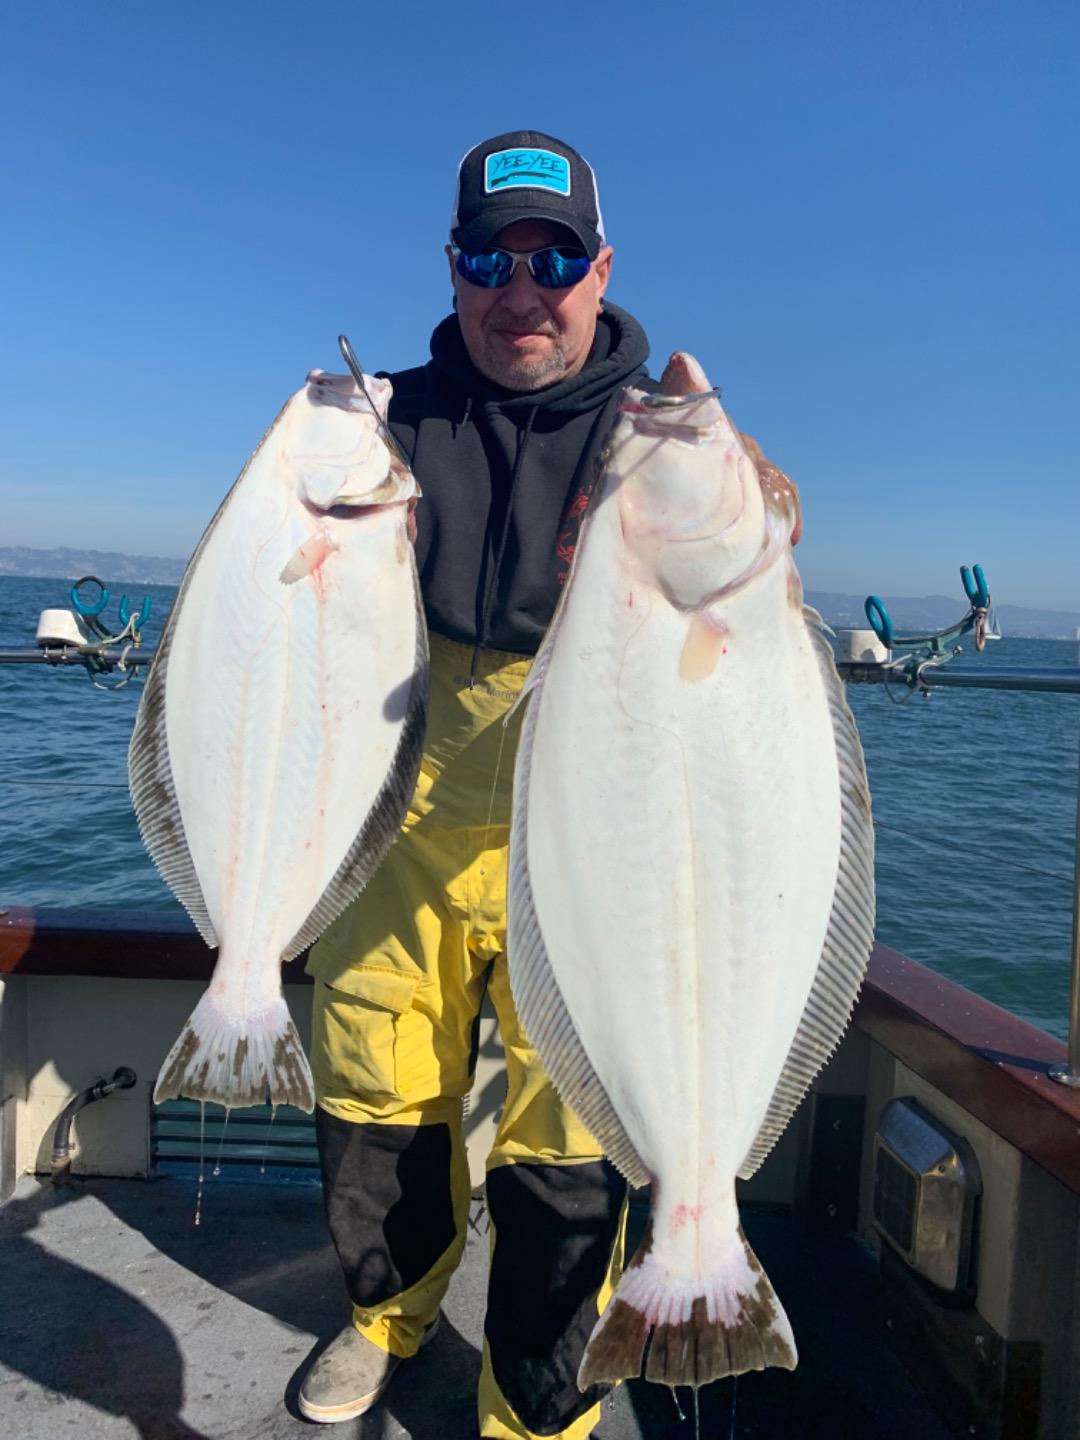 Another fun day on the bay!!